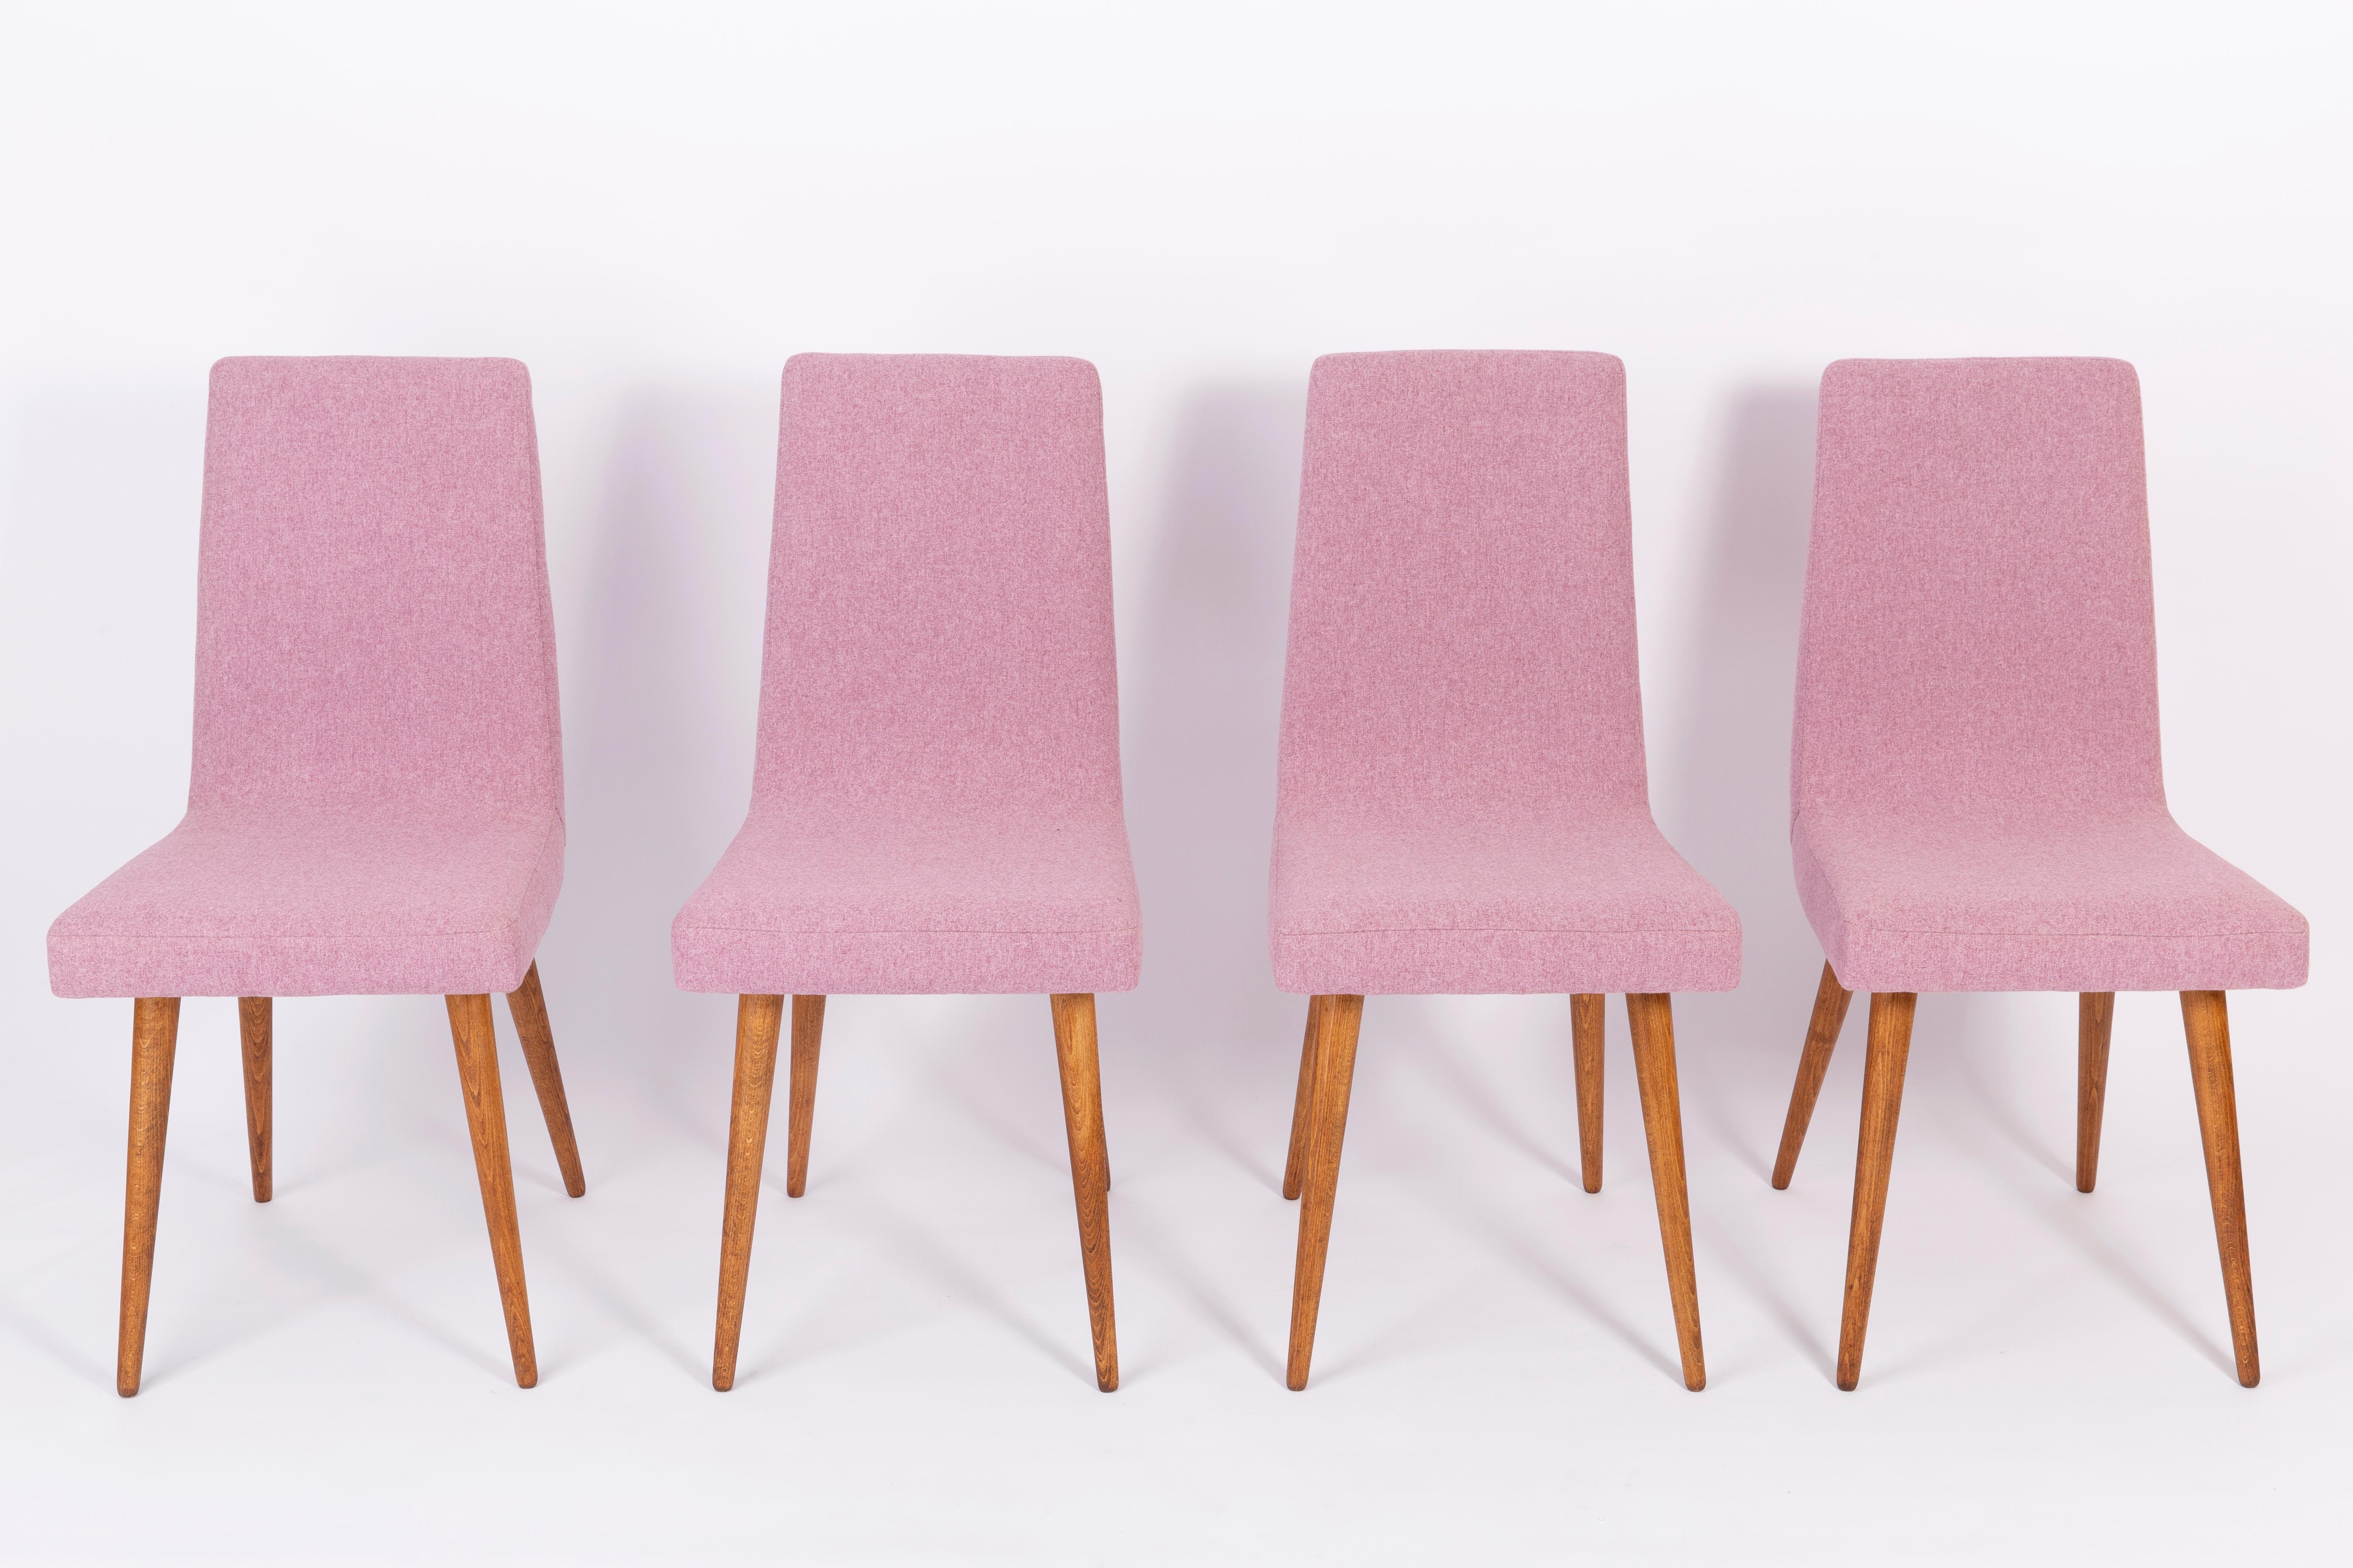 Set of four amazing chairs from the 1970s, produced in the Silesian furniture factory in Swiebodzin - at the moment they are unique. They are original vintage design after full professional renovation. Due to their dimensions, they perfectly blend